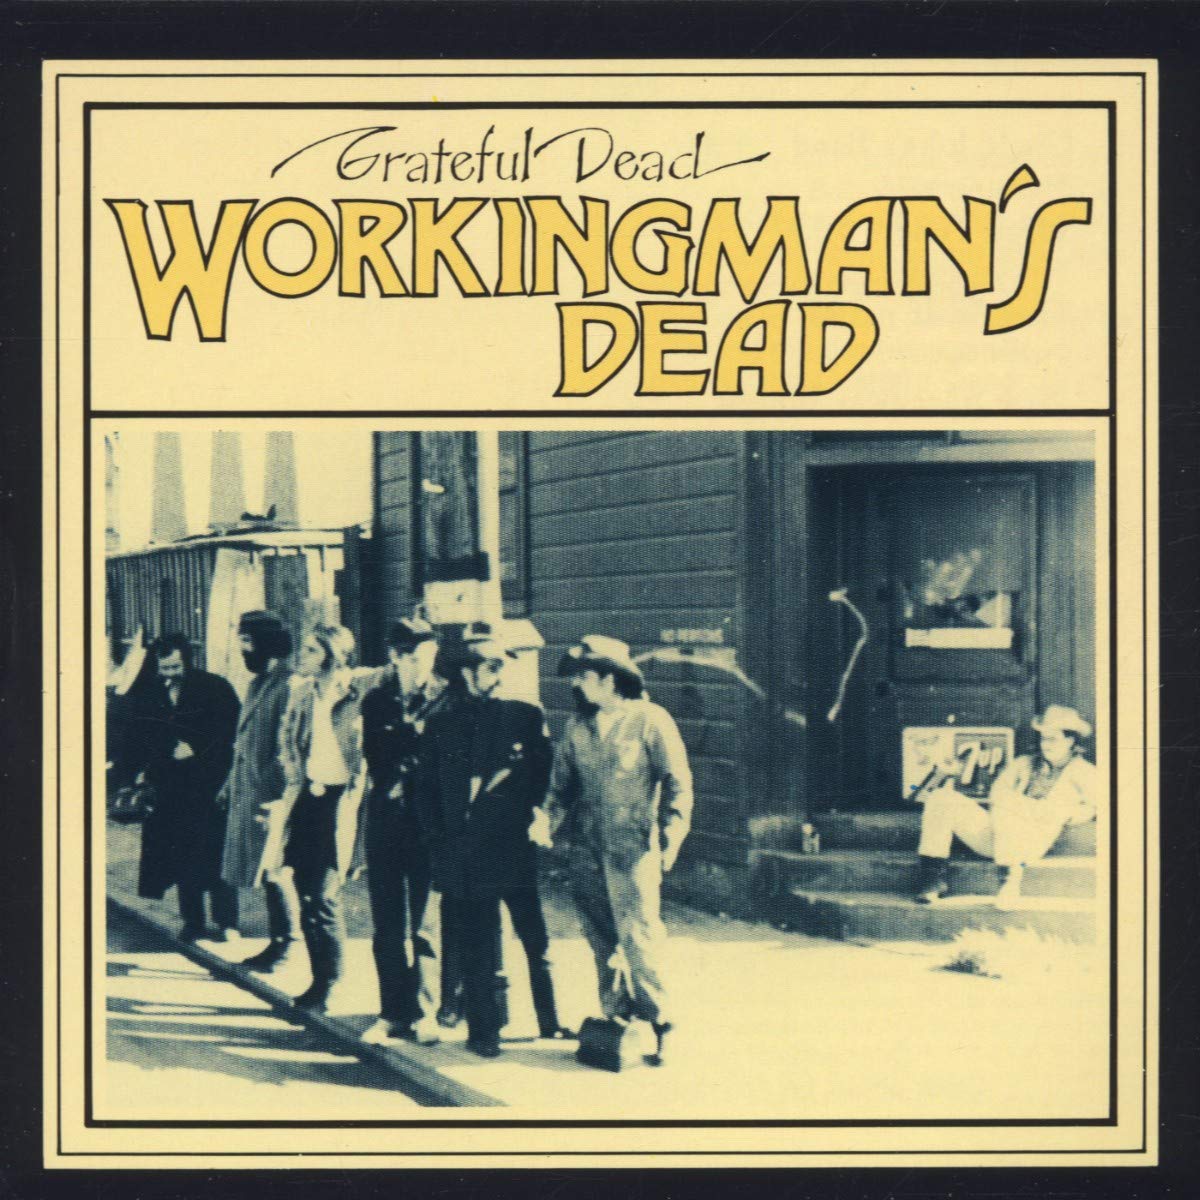 Grateful Dead - Workingman's Dead, 1970 

The album and its studio follow-up, American Beauty, were recorded back-to-back using a similar style, eschewing the psychedelic experimentation of previous albums in favor of Jerry Garcia and Robert Hunter's Americana-styled songcraft.